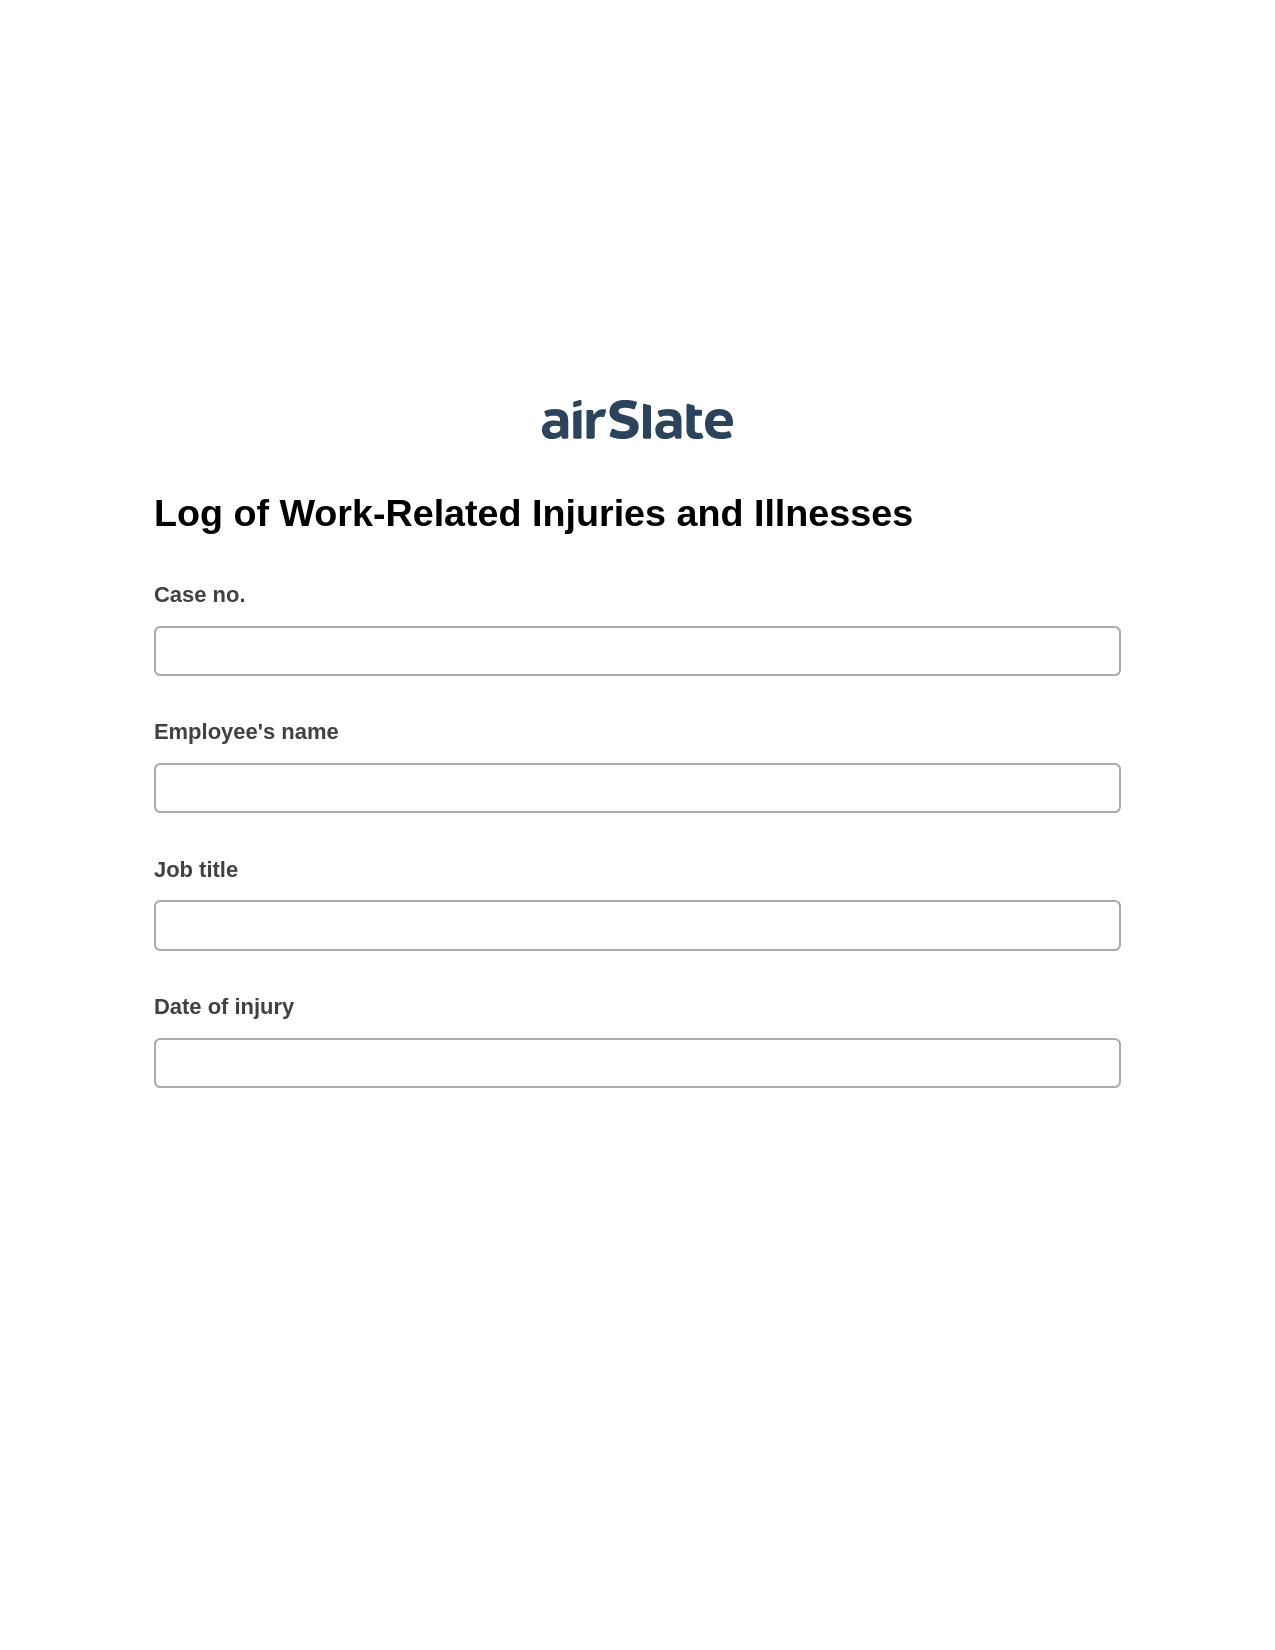 Multirole Log of Work-Related Injuries and Illnesses Pre-fill from Salesforce Record Bot, Remove Tags From Slate Bot, Post-finish Document Bot